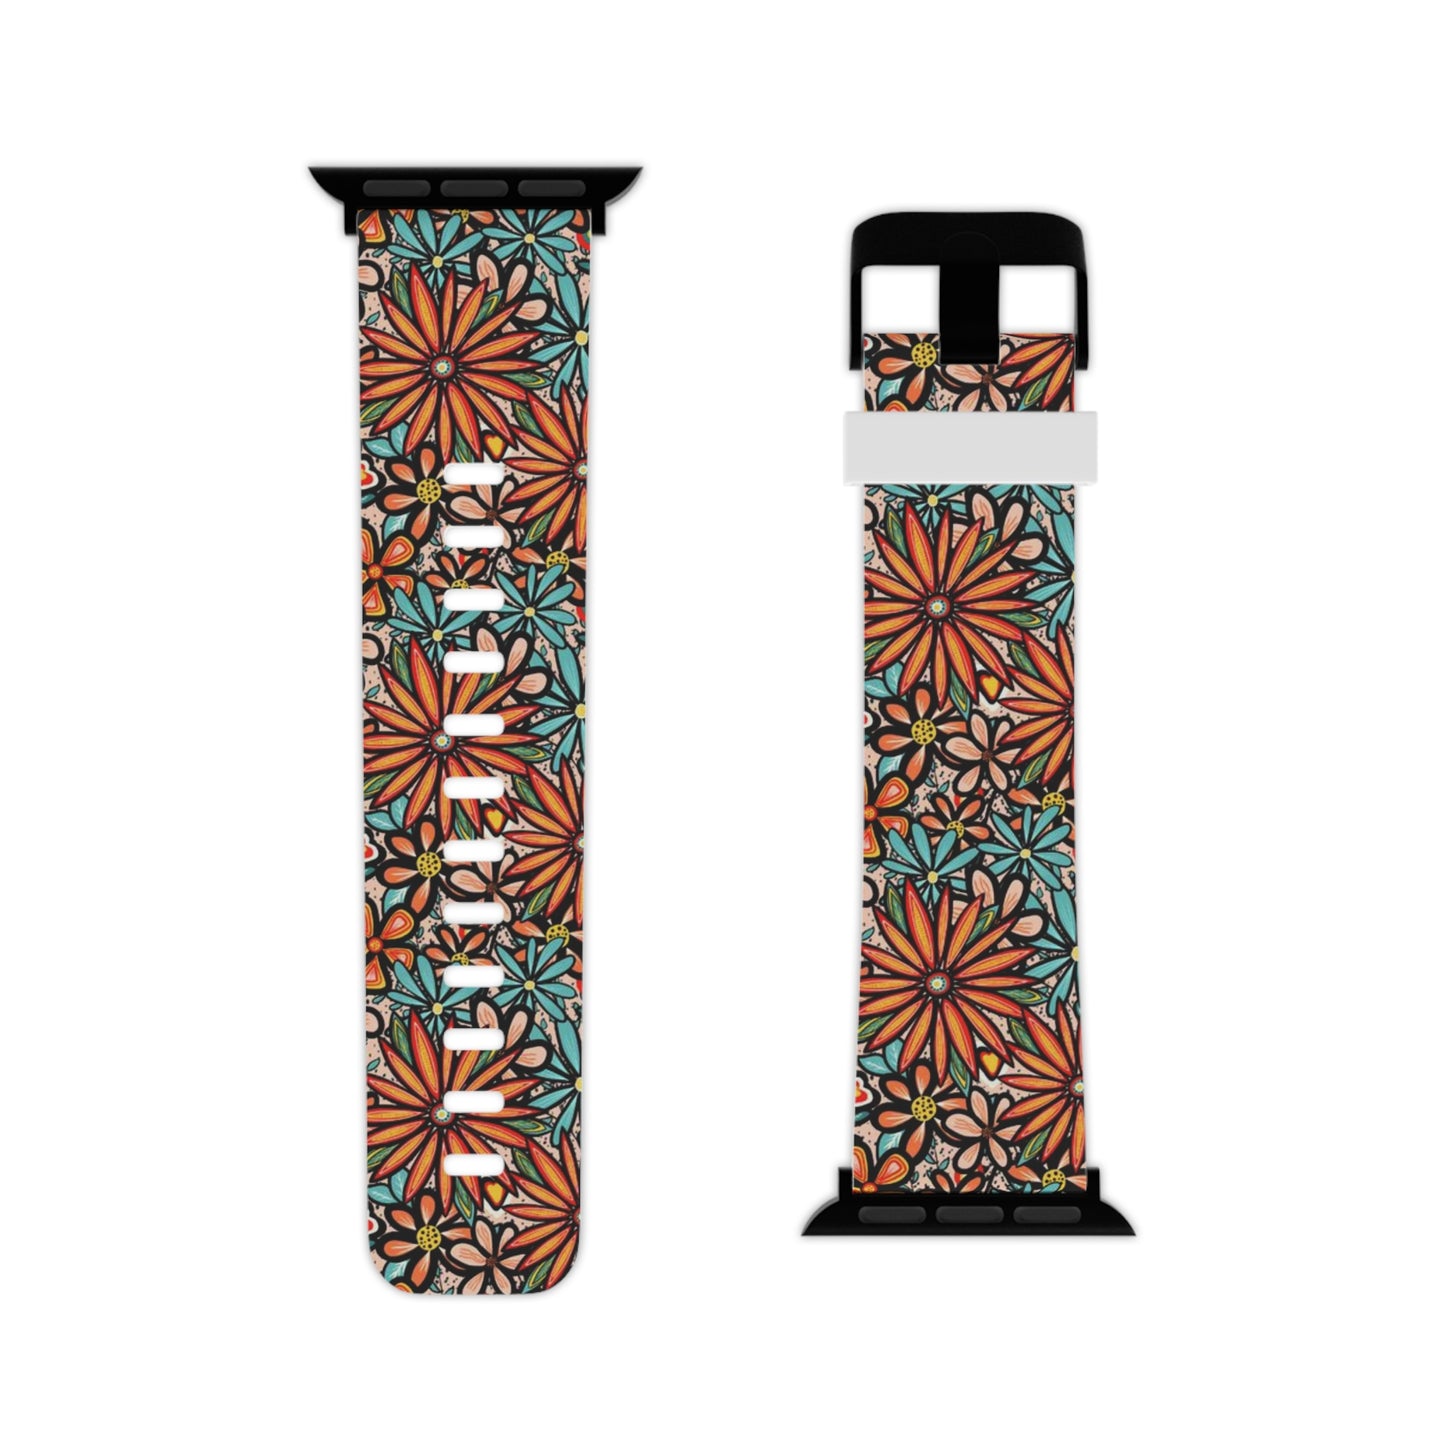 Flower Power Watch Band for Apple Watch